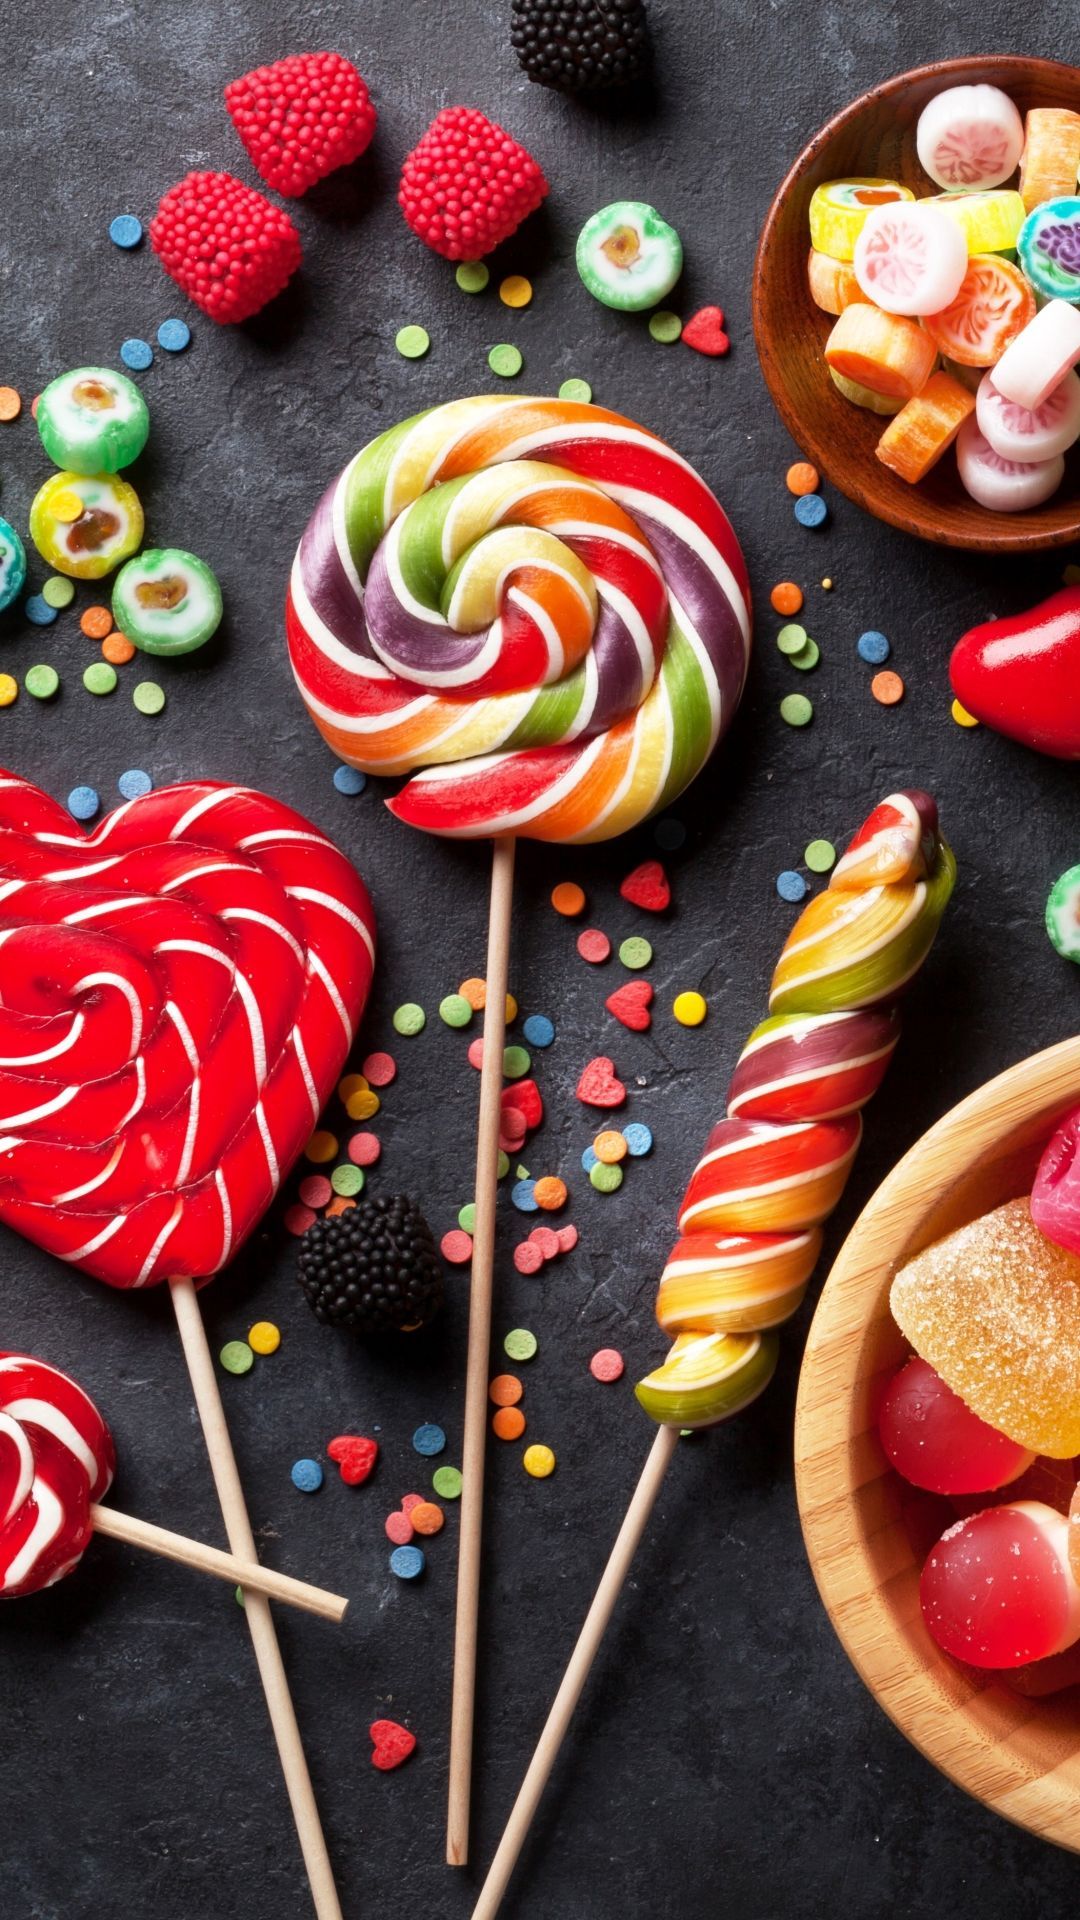 Awesome 8 Food Wallpaper Widescreen For Your Android or iPhone Wallpaper #android #iphone #wallpaper. Food wallpaper, Candy recipes, Candy photography